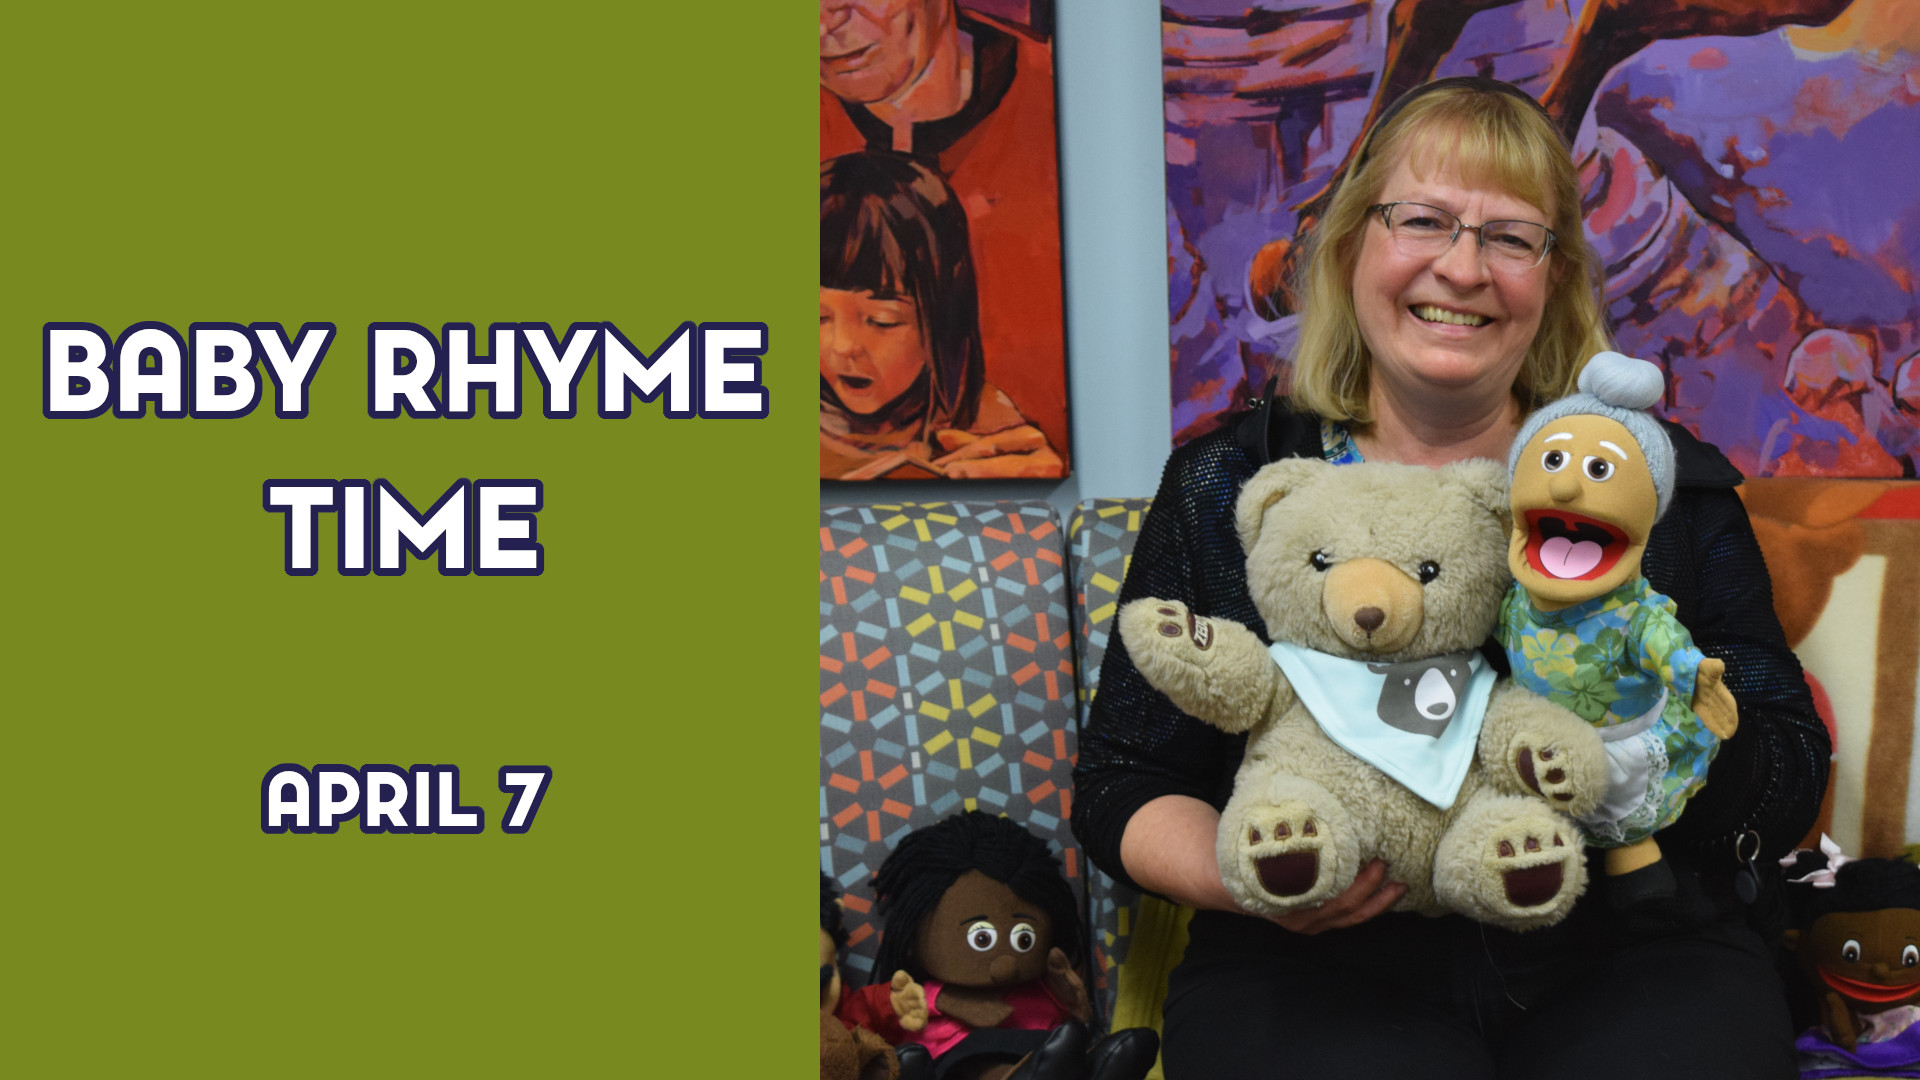 A woman holds a stuffed bear next to the text "Baby Rhyme Time April 7"